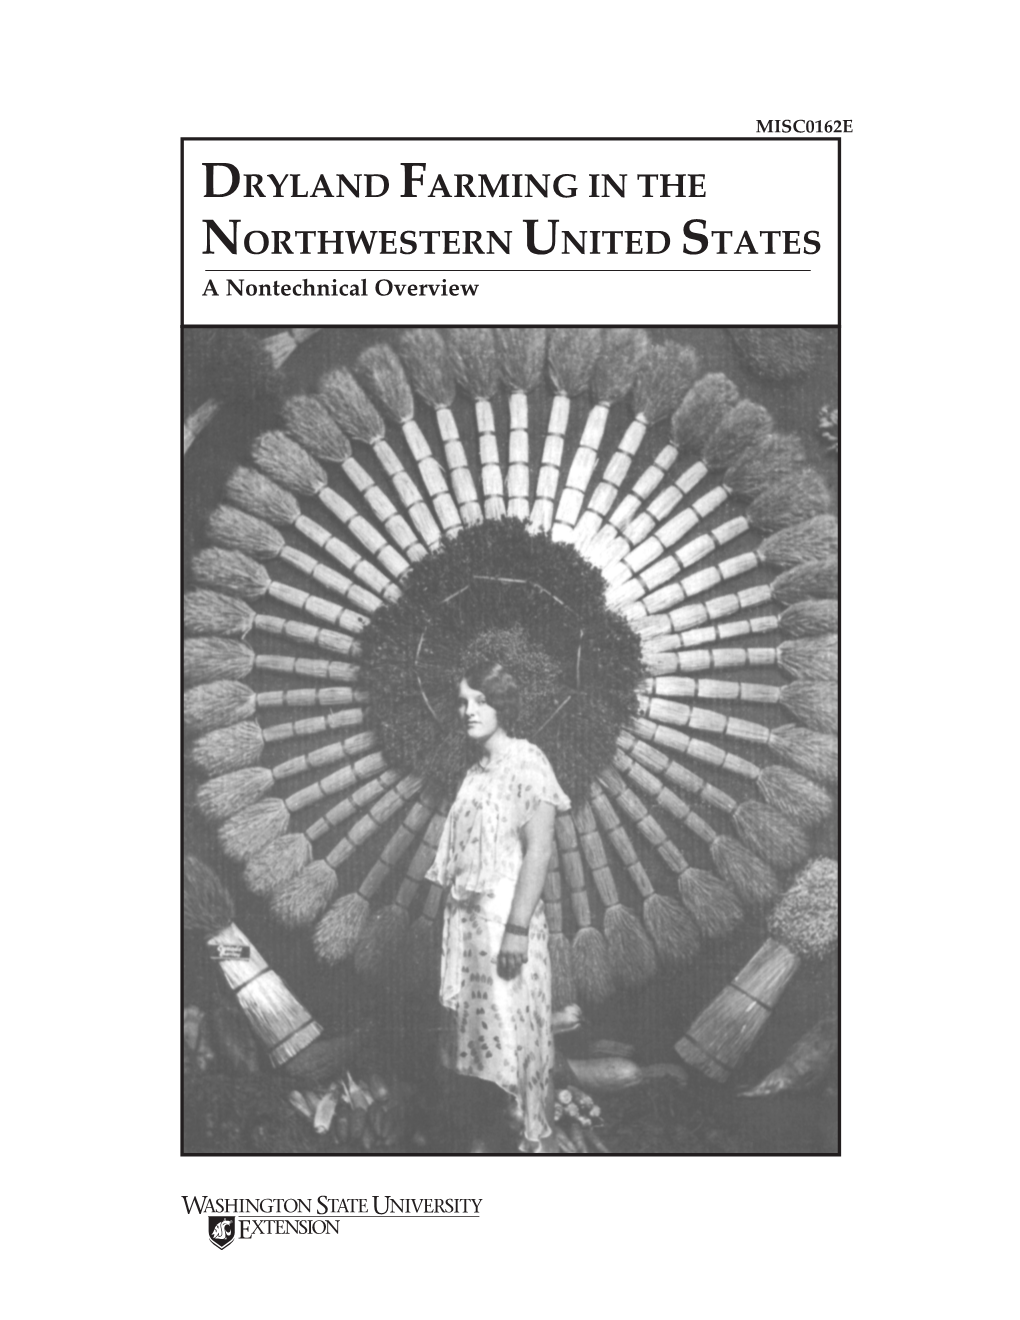 Dryland Farming in the Northwestern United States: a Nontechnical Overview